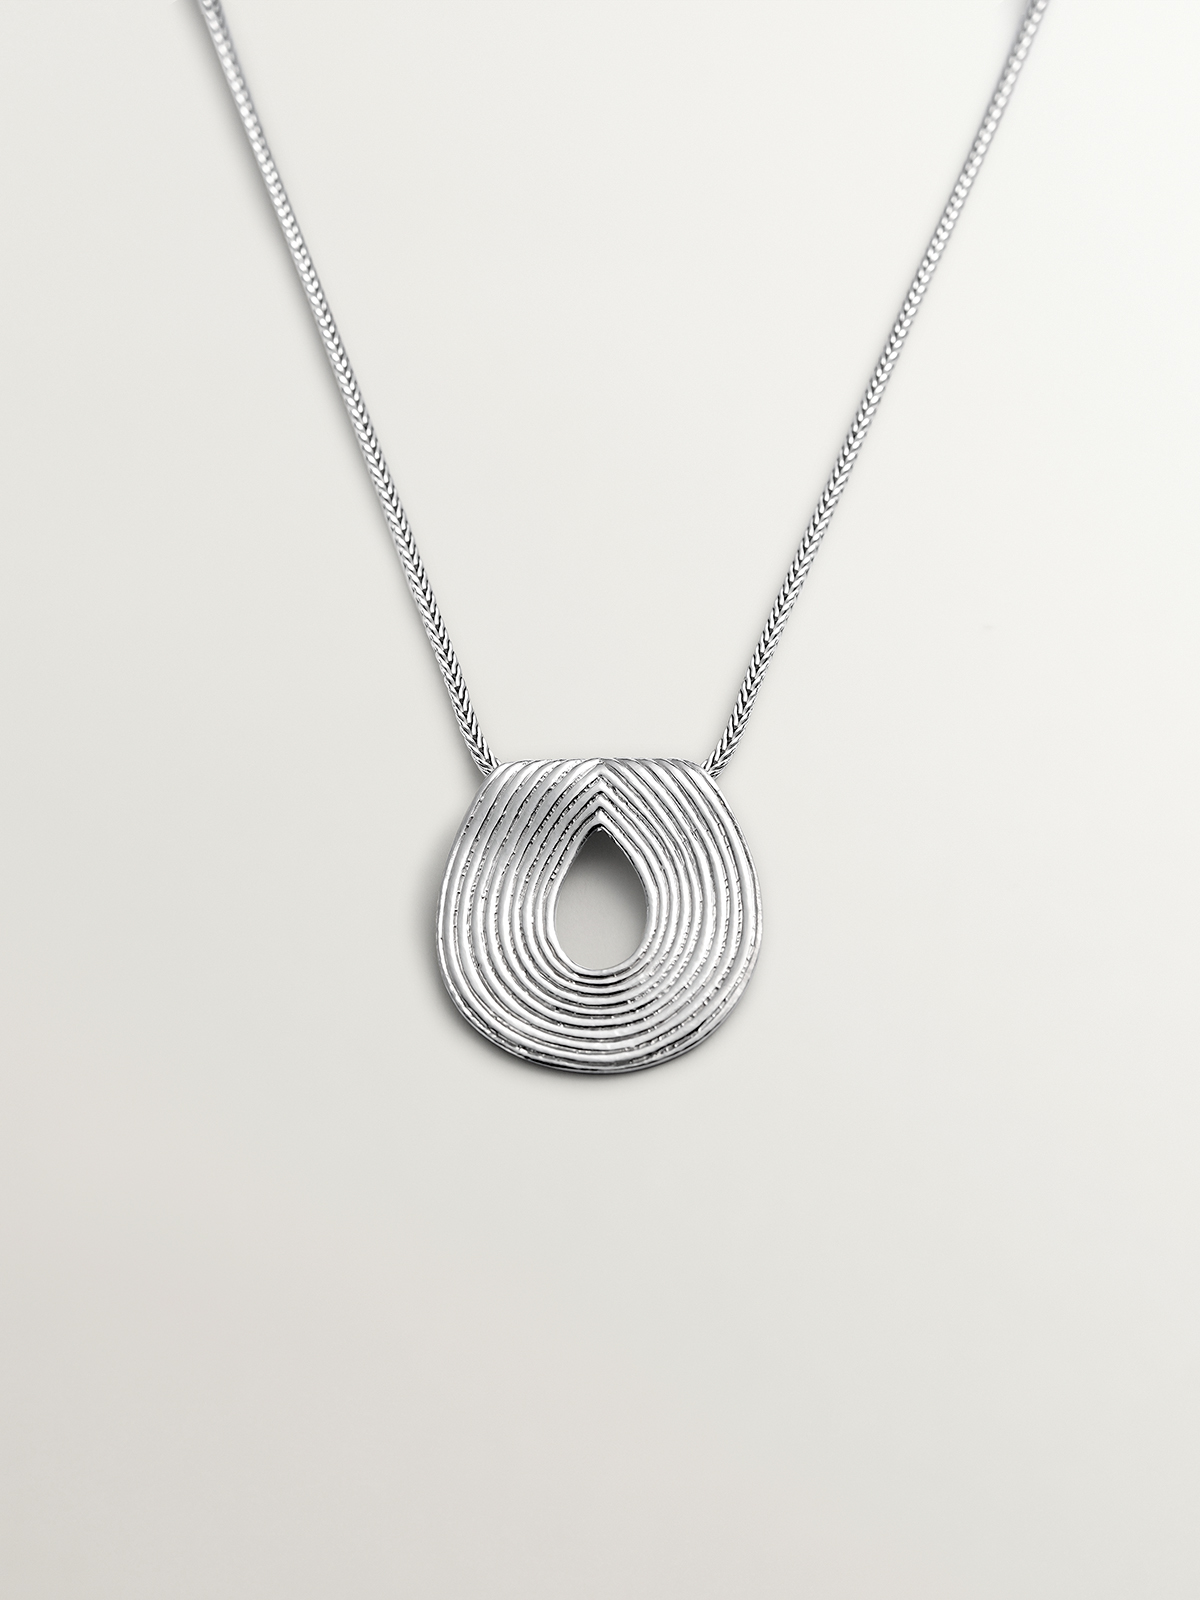 Oval-shaped 925 silver pendant with embossing.